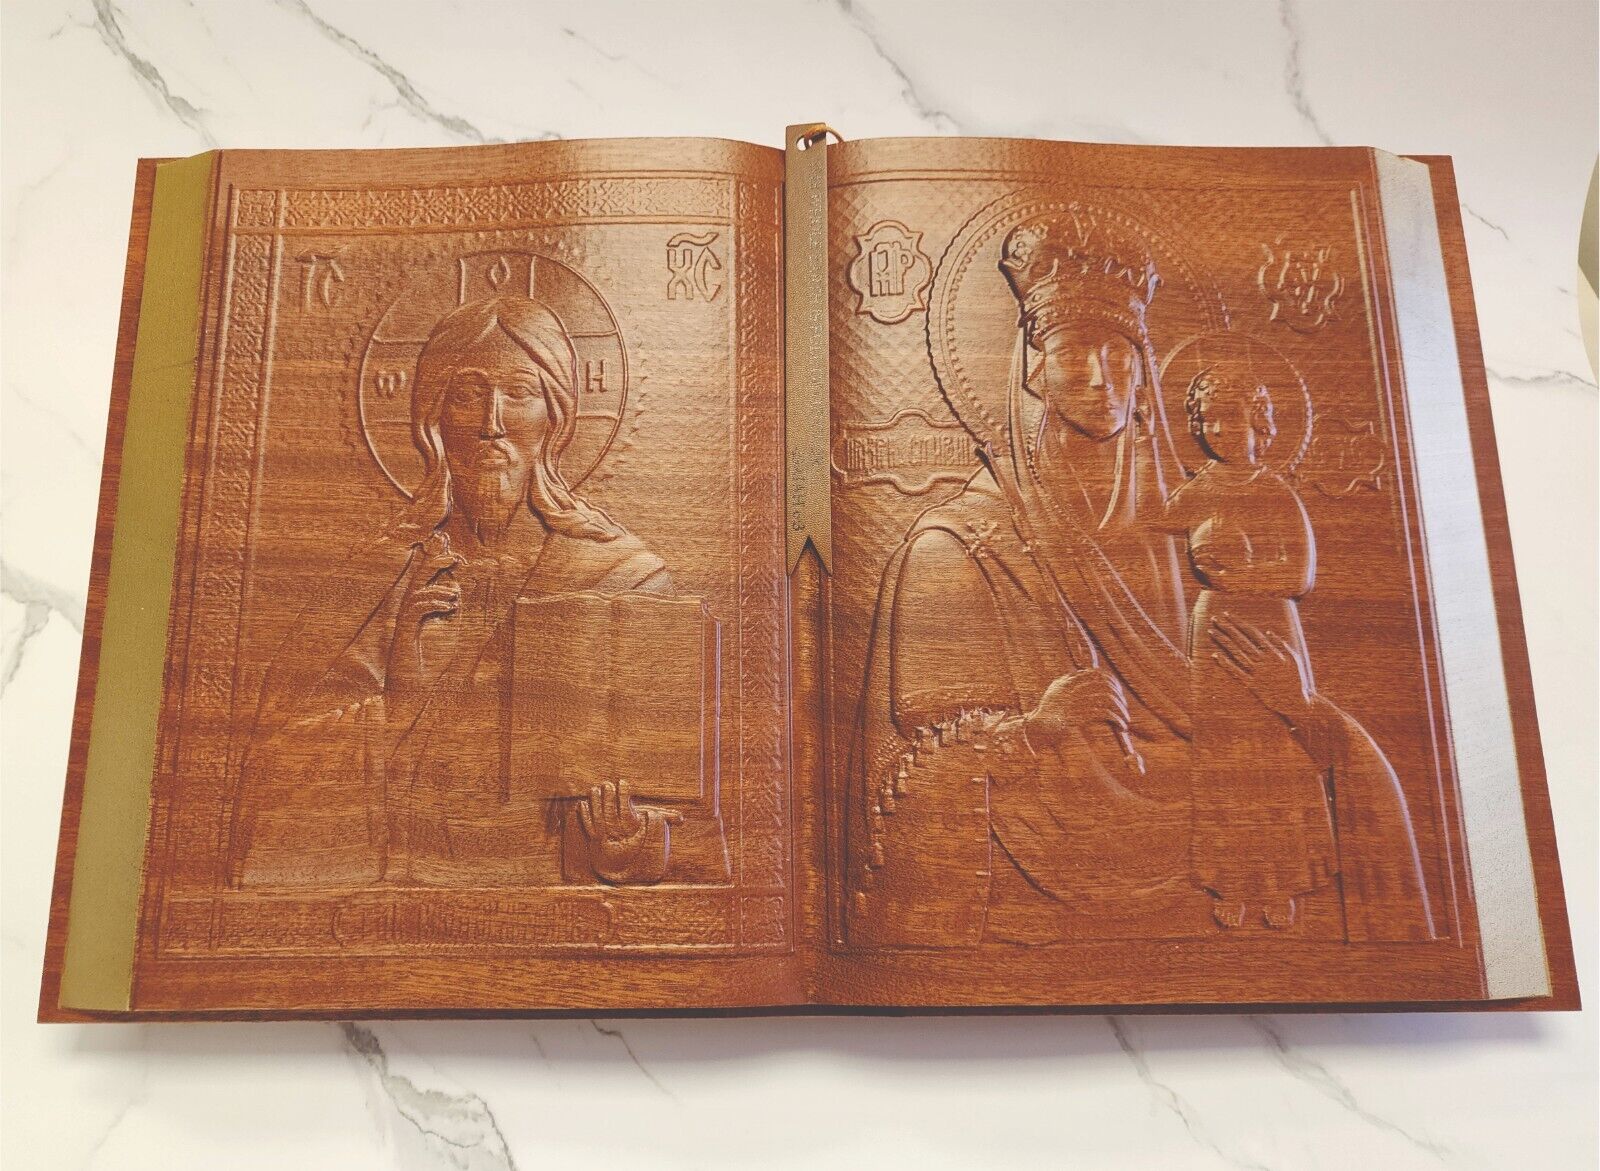 Mahogany Wood Carving Desk Decoration, Religious Book with plexi stand